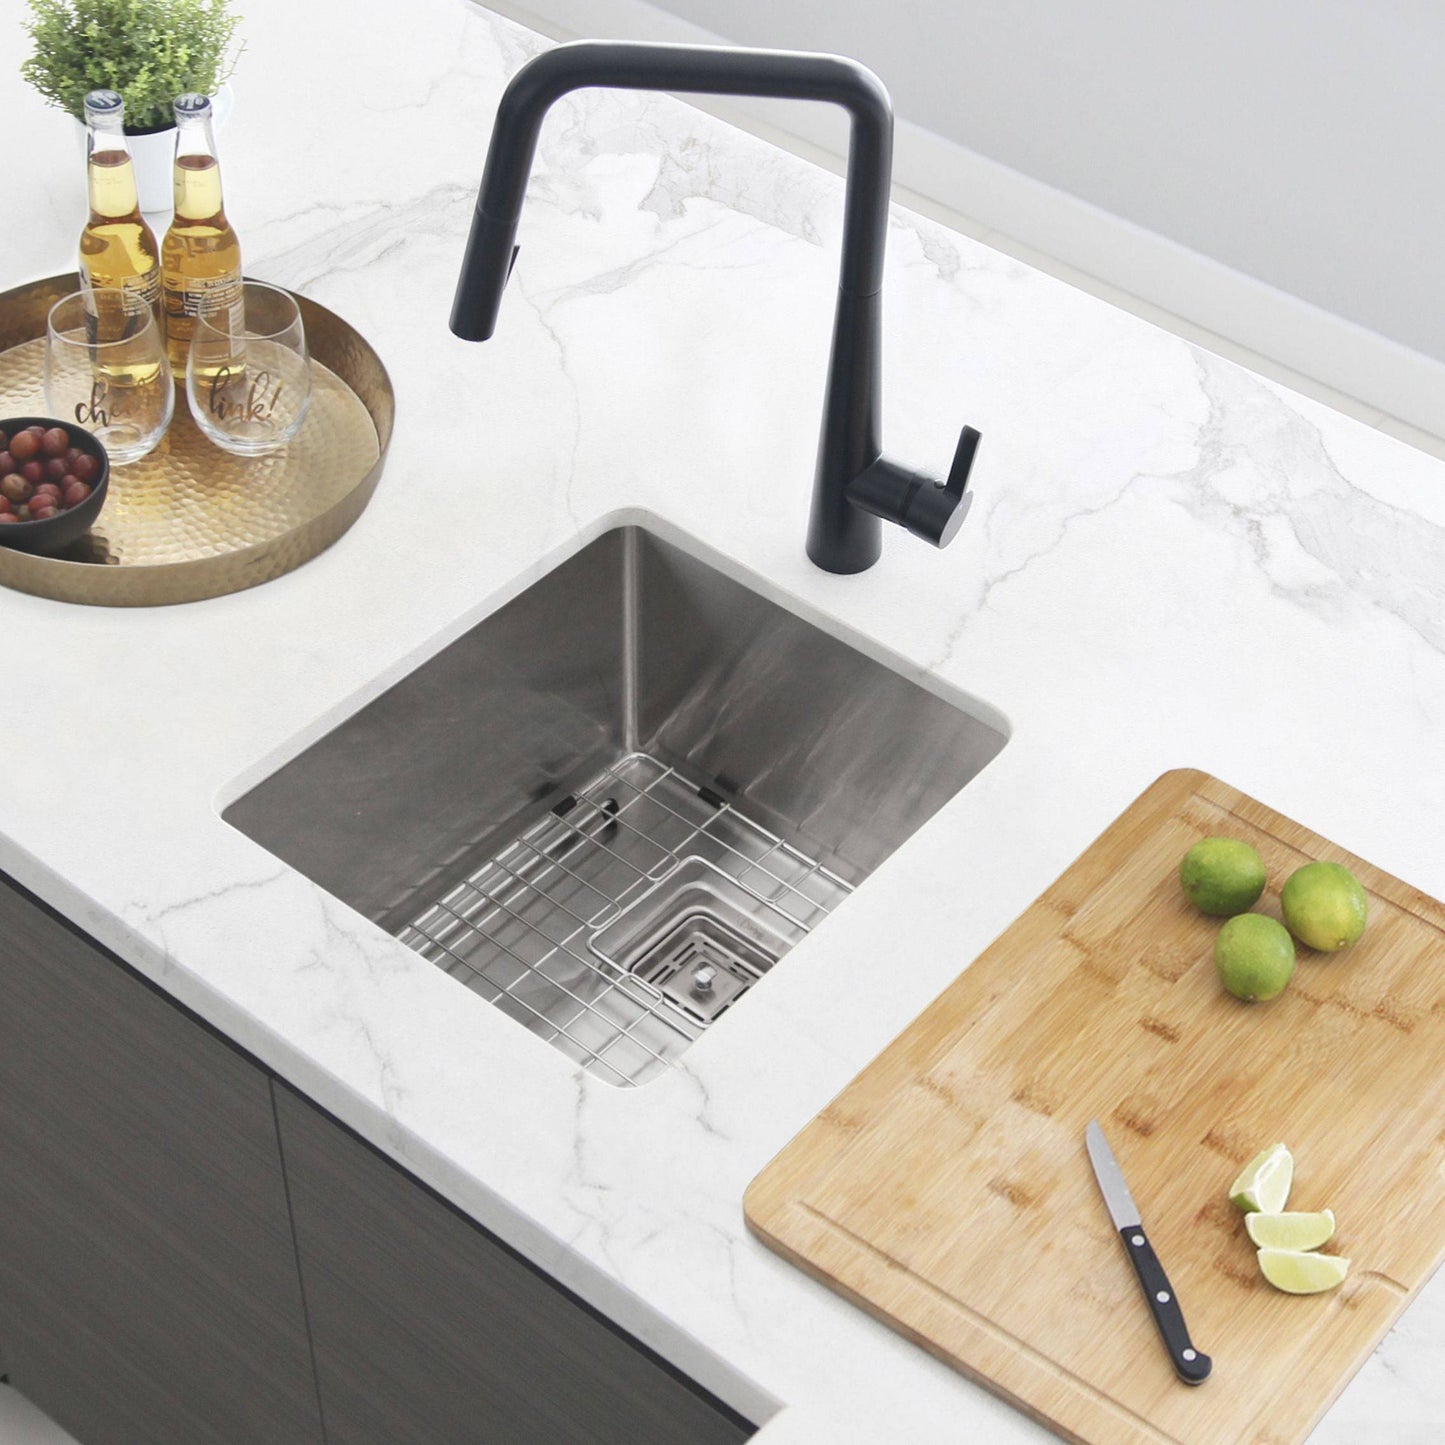 Stylish Kubo 16" x 18" Single Bowl Stainless Steel Kitchen Sink with Square Strainer S-509XG